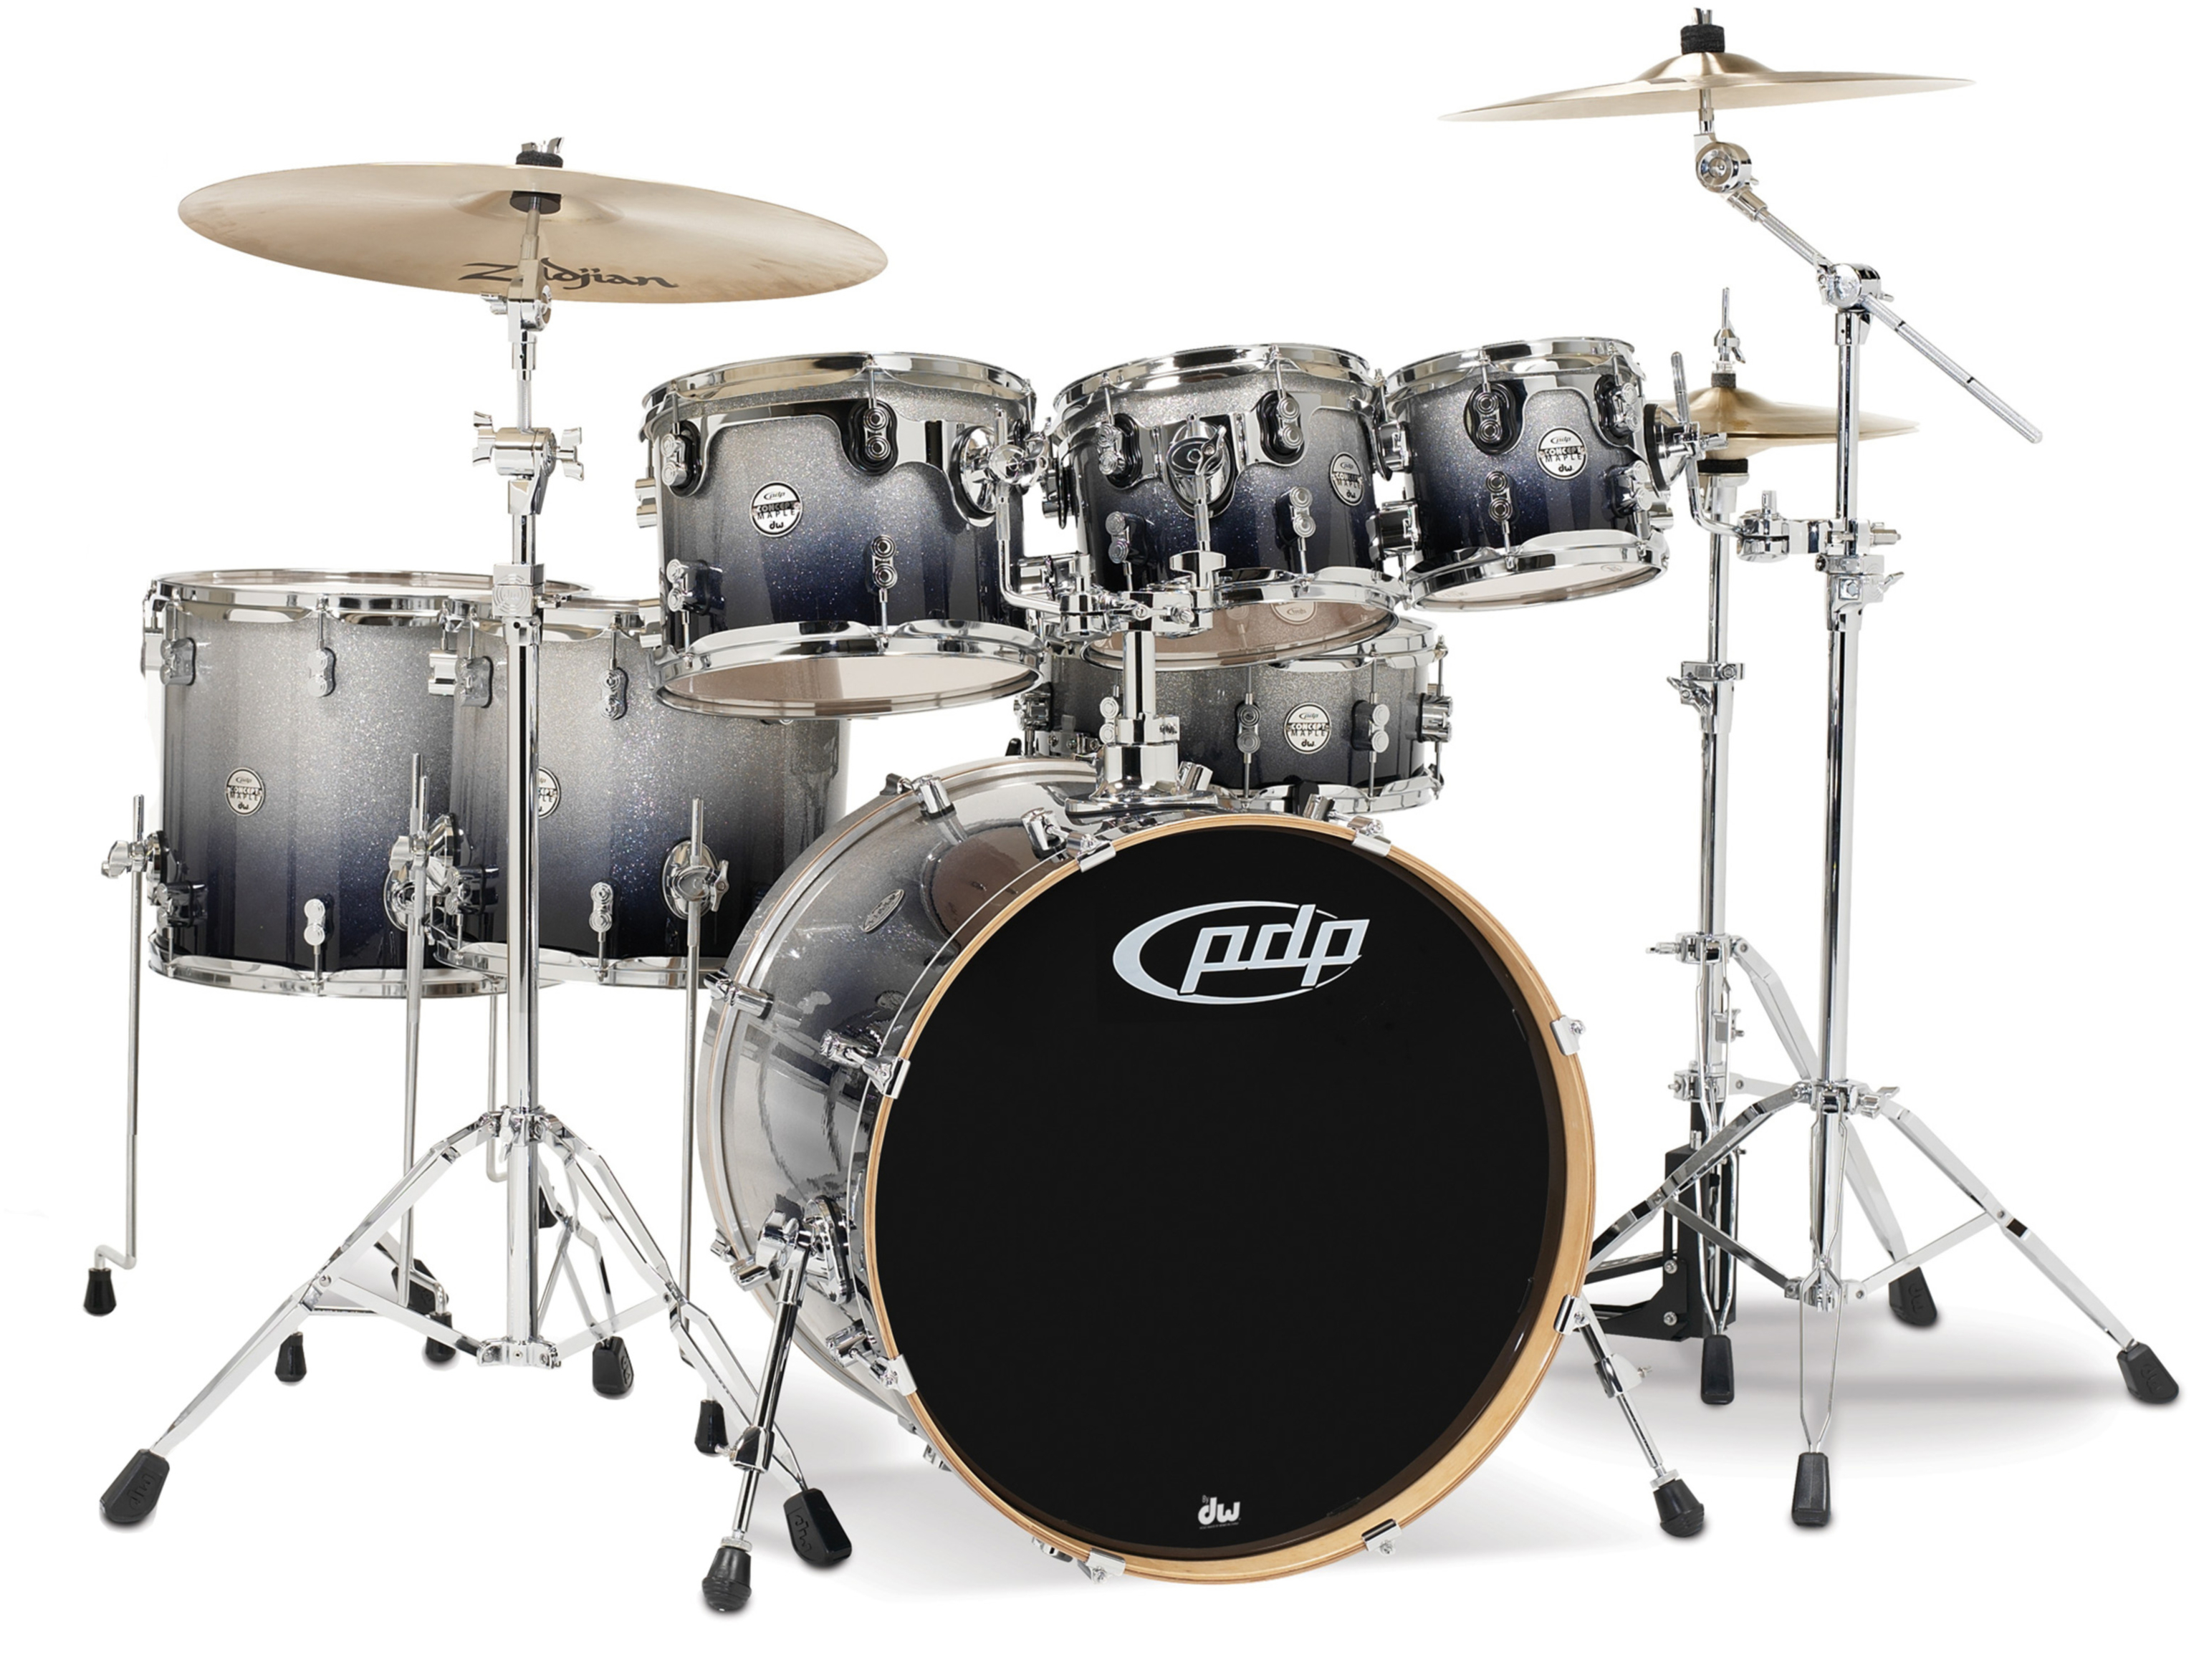 PDP PDP Concept Maple CM7, Silver to Black Fade | MUSIC STORE professional